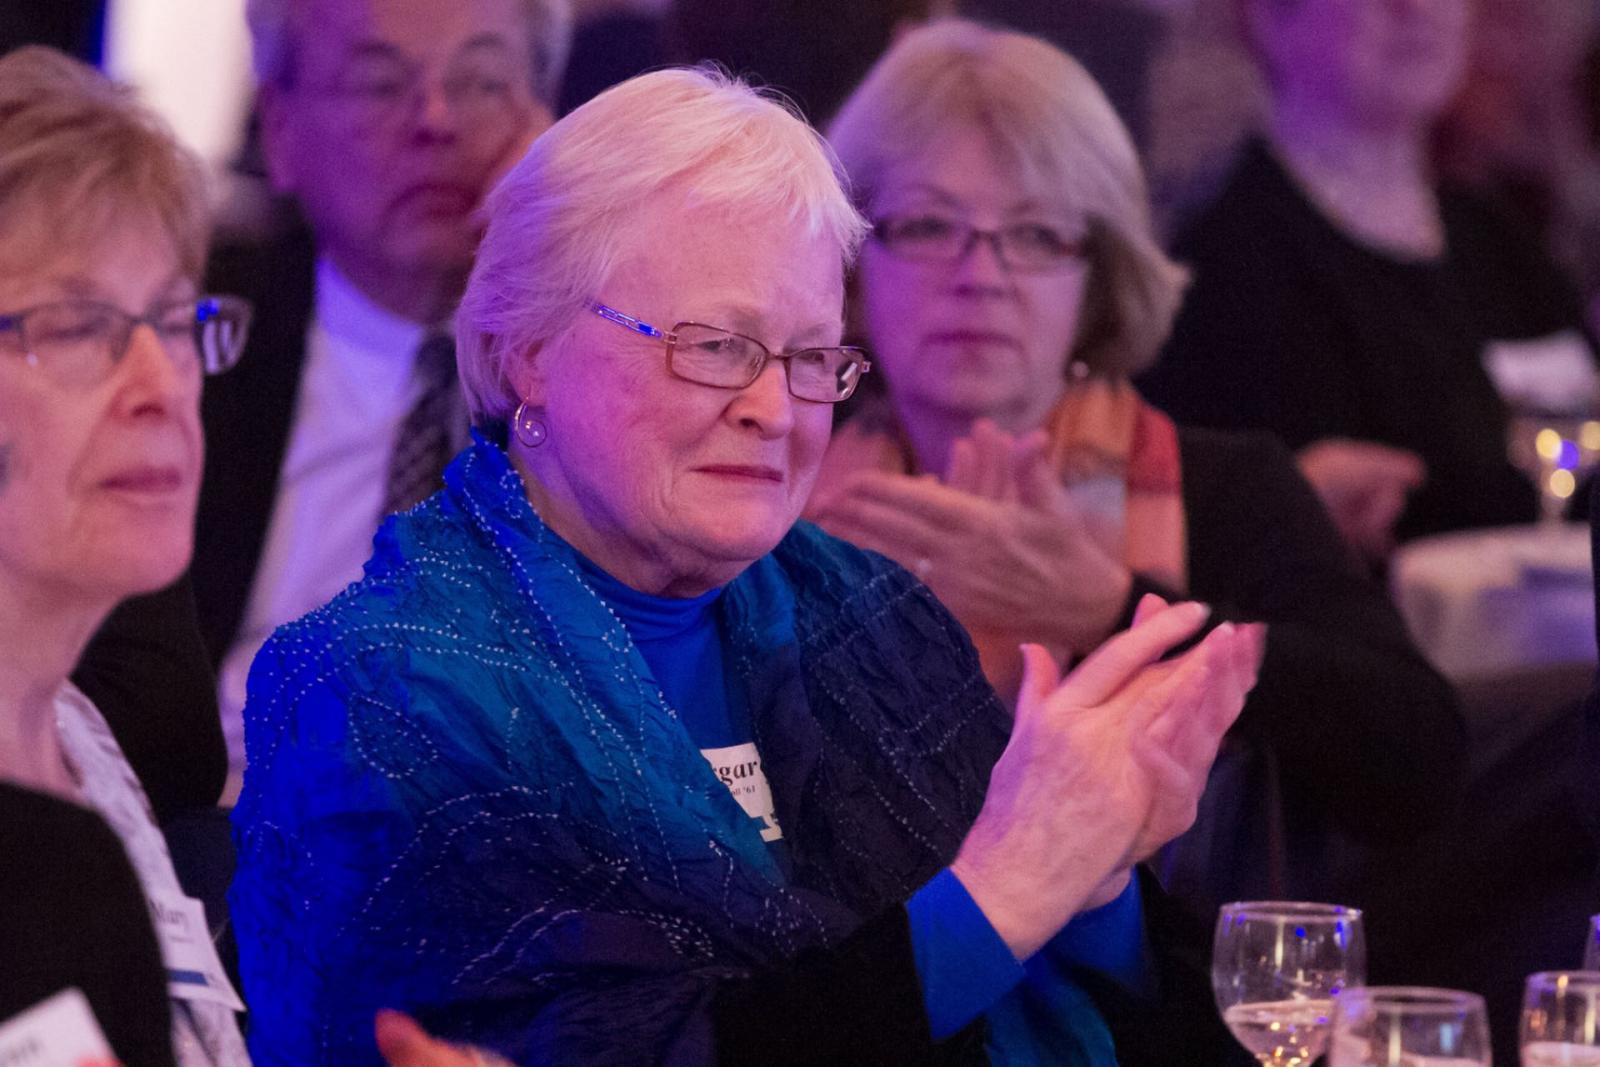 Margaret Carroll clapping while at a dinner banquet.